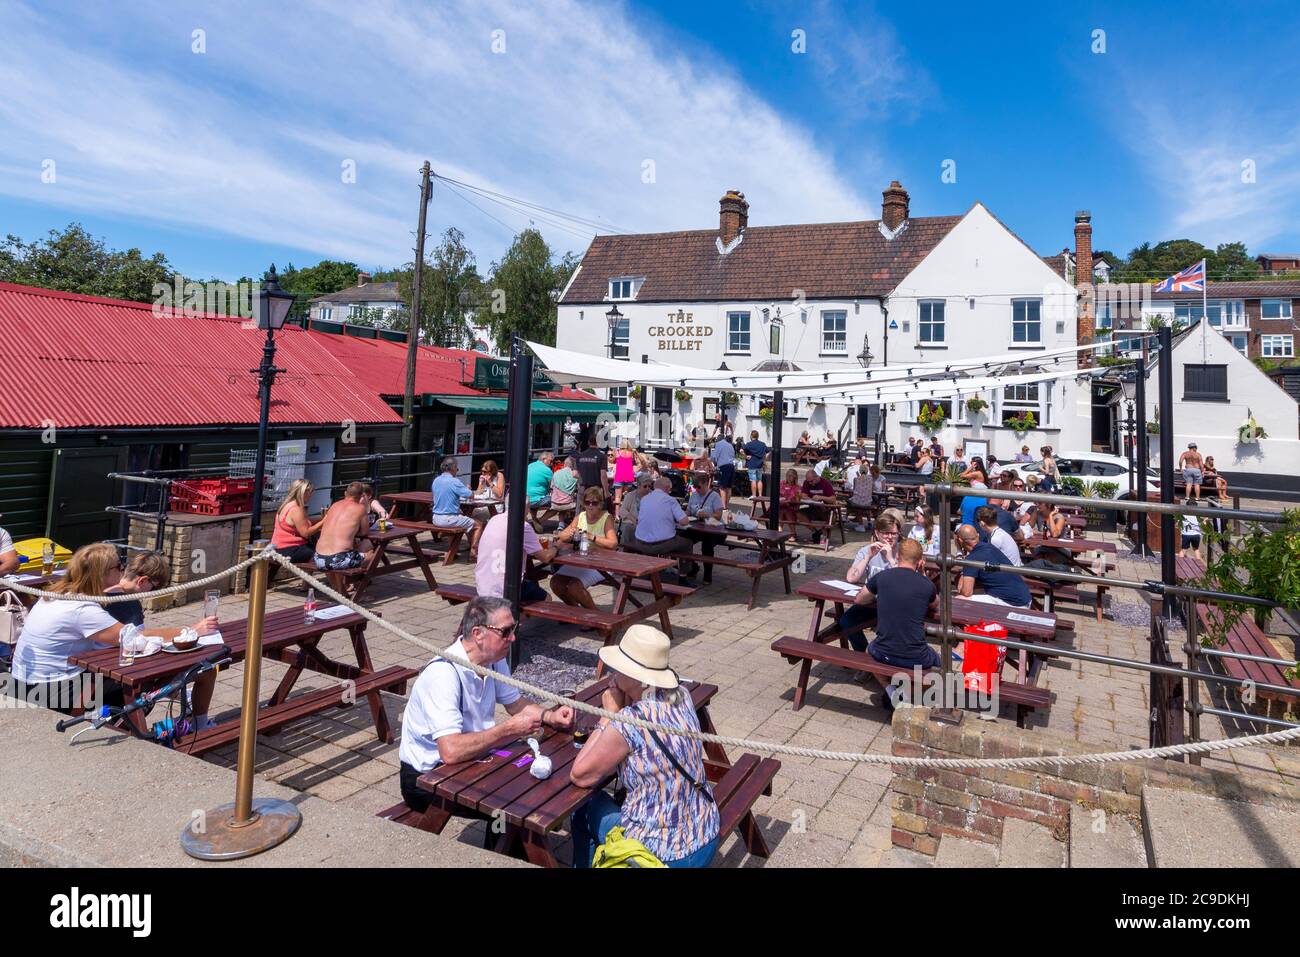 The Crooked Billet pub, with associated outdoor tables for customers outside on Billet Wharf. Busy with customers during COVID-19 Coronavirus lockdown Stock Photo